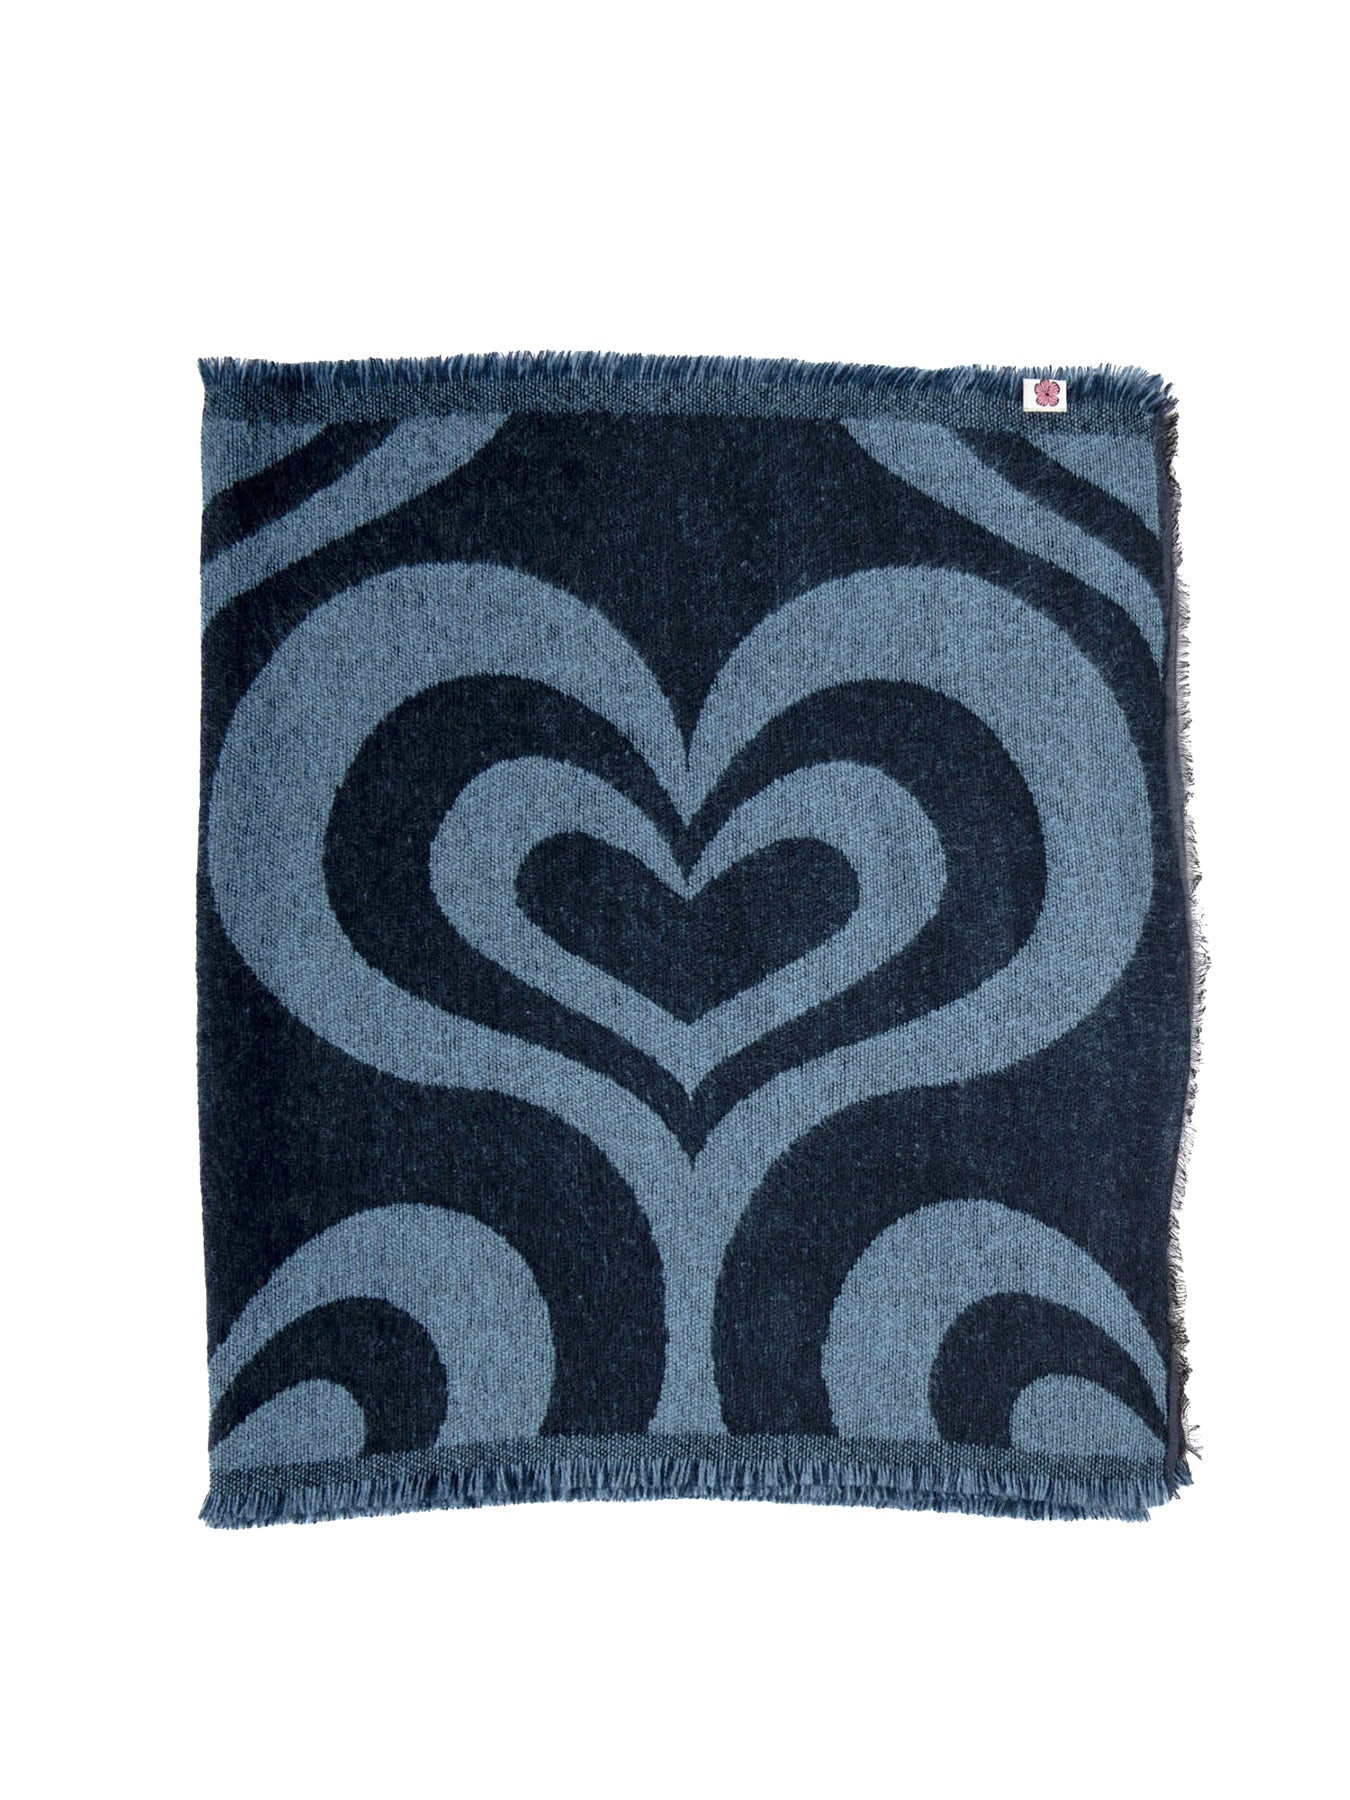 SHANNON scarf Mod Hearts Blue - Lesley Evers-Accessories-gifts under $75-scarf